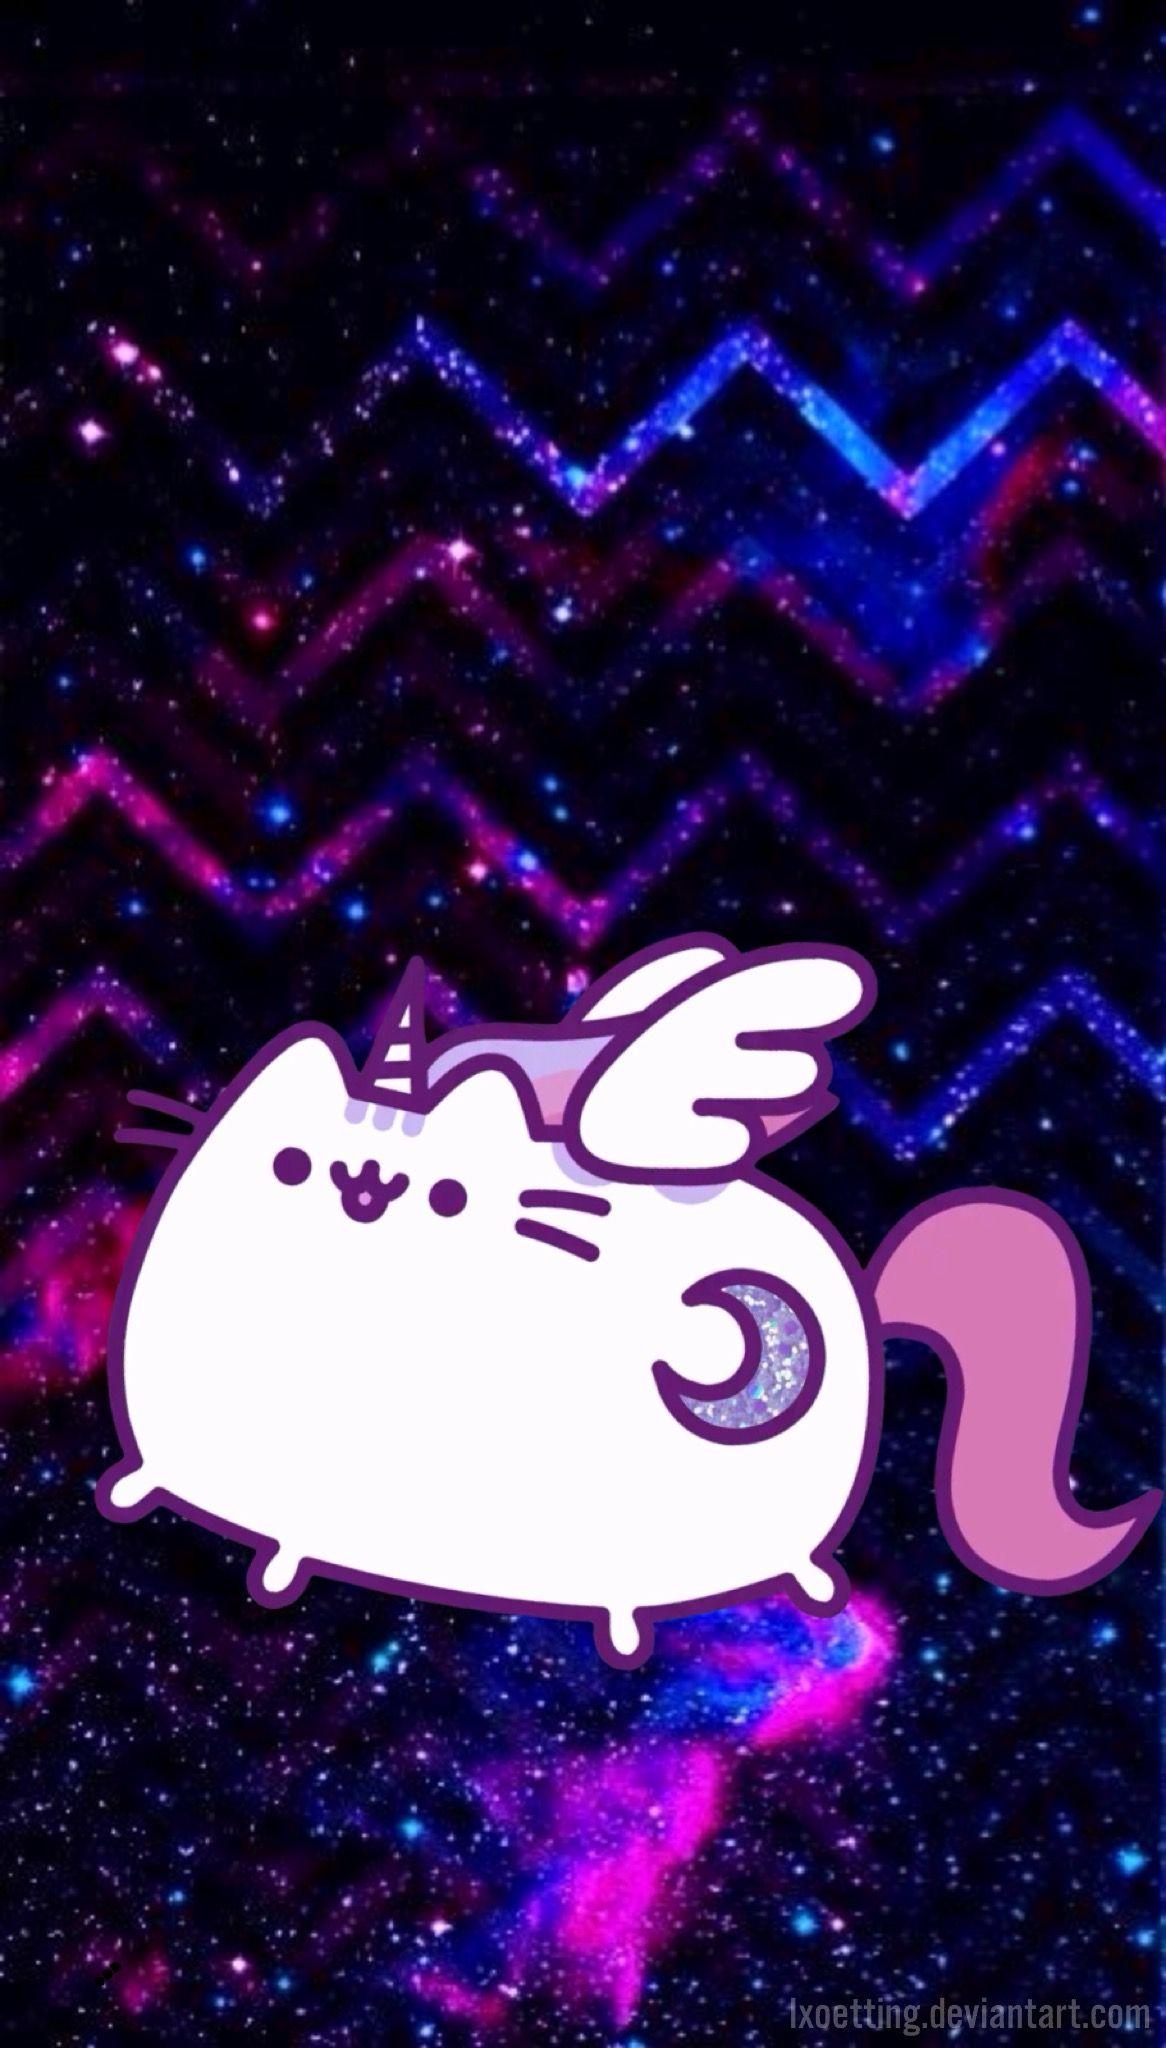 OMG!!! Pusheen and Unicorn in one picture, in one body!!! I